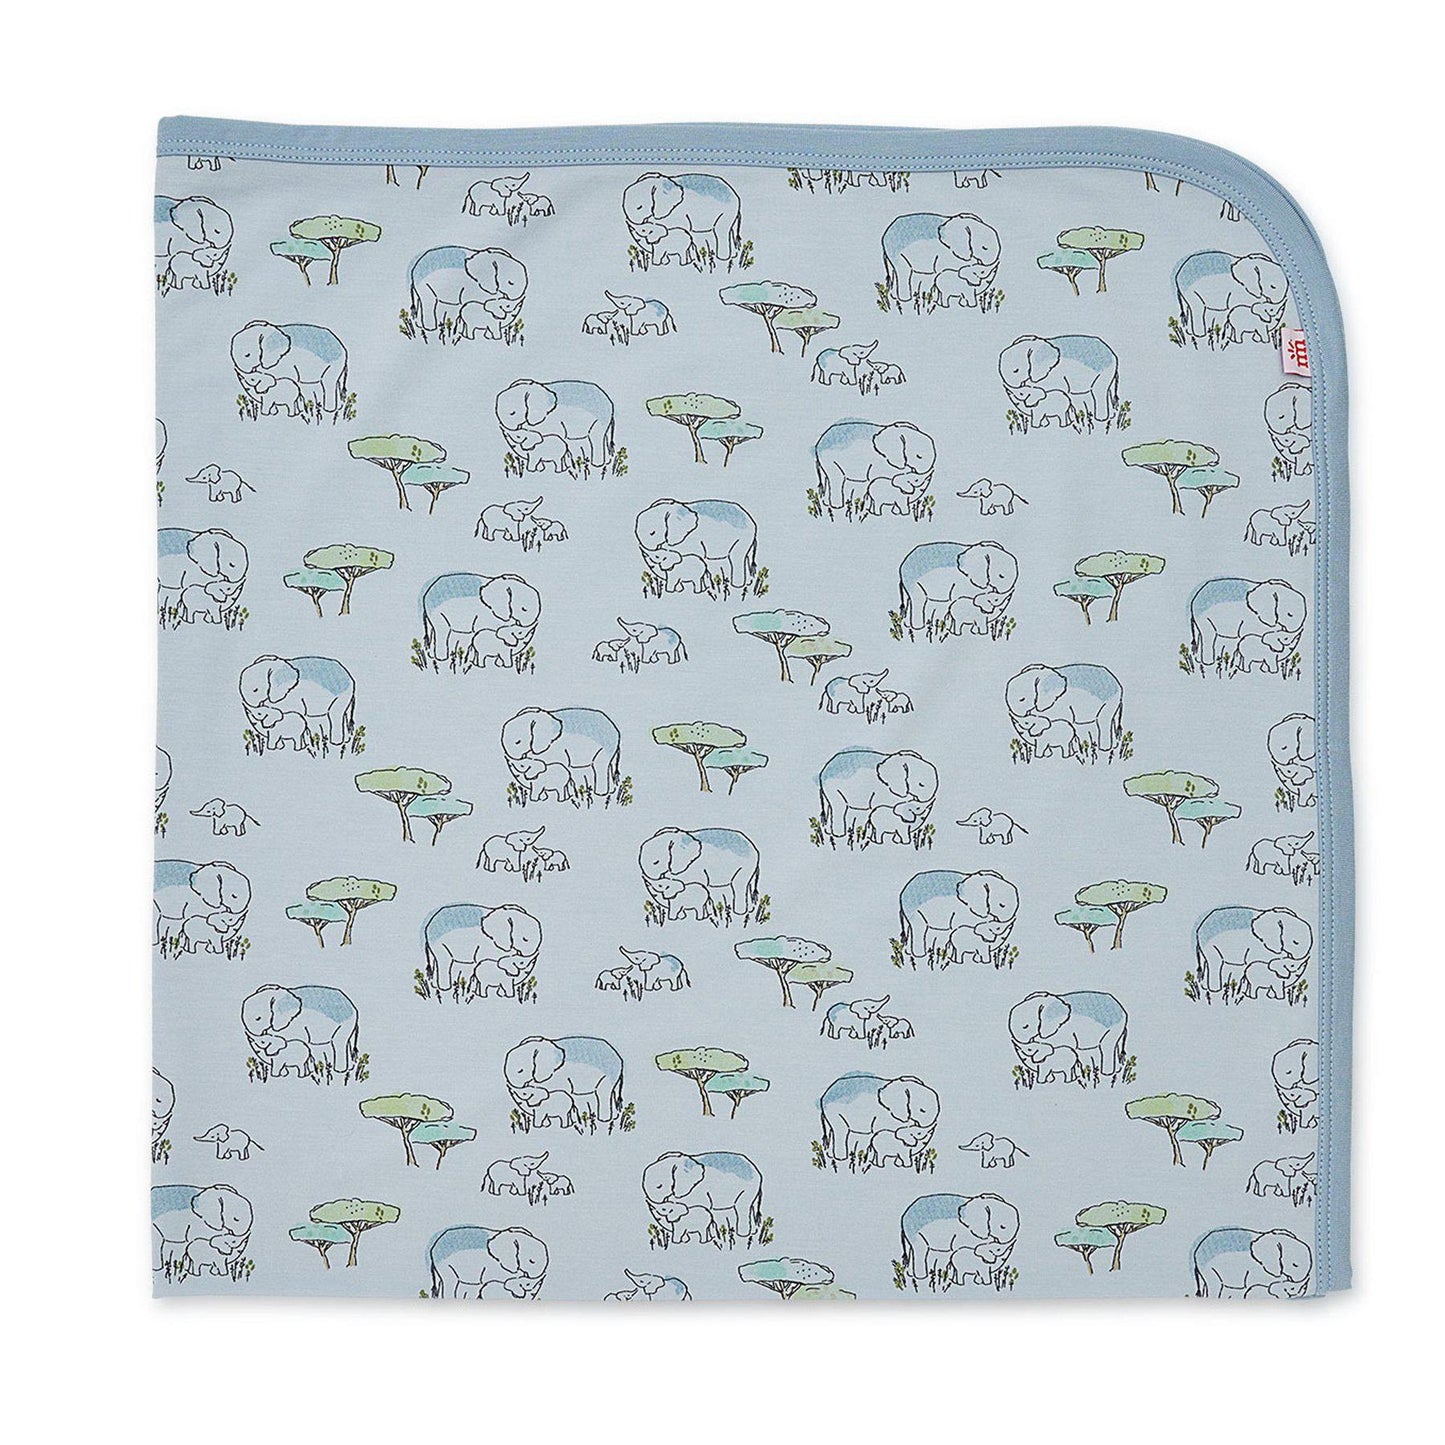 Blue Love You A Ton Modal Swaddle Blanket